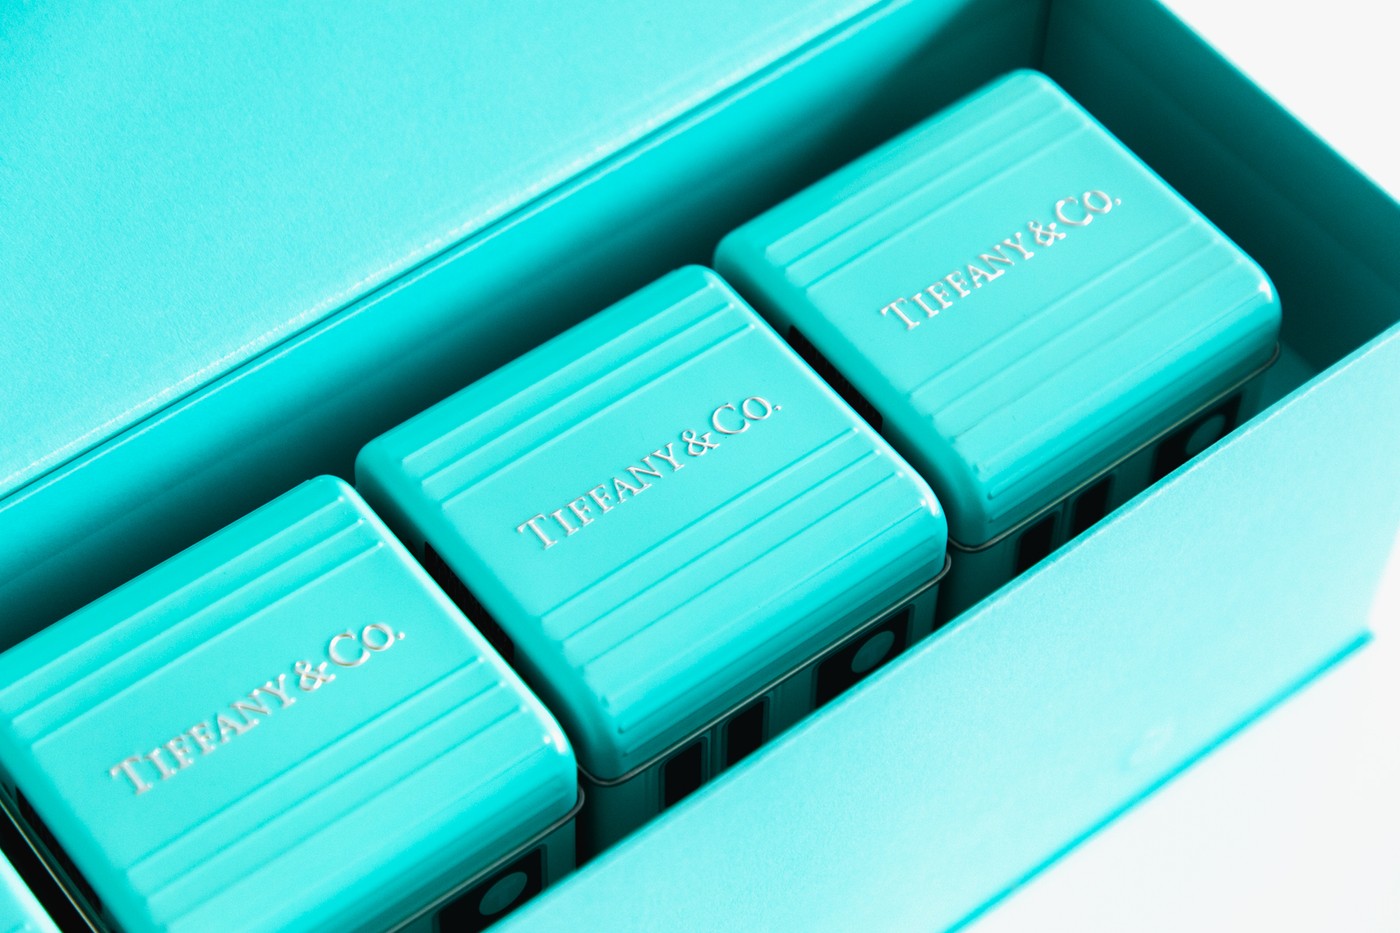 Mooncakes by Tiffany & Co.